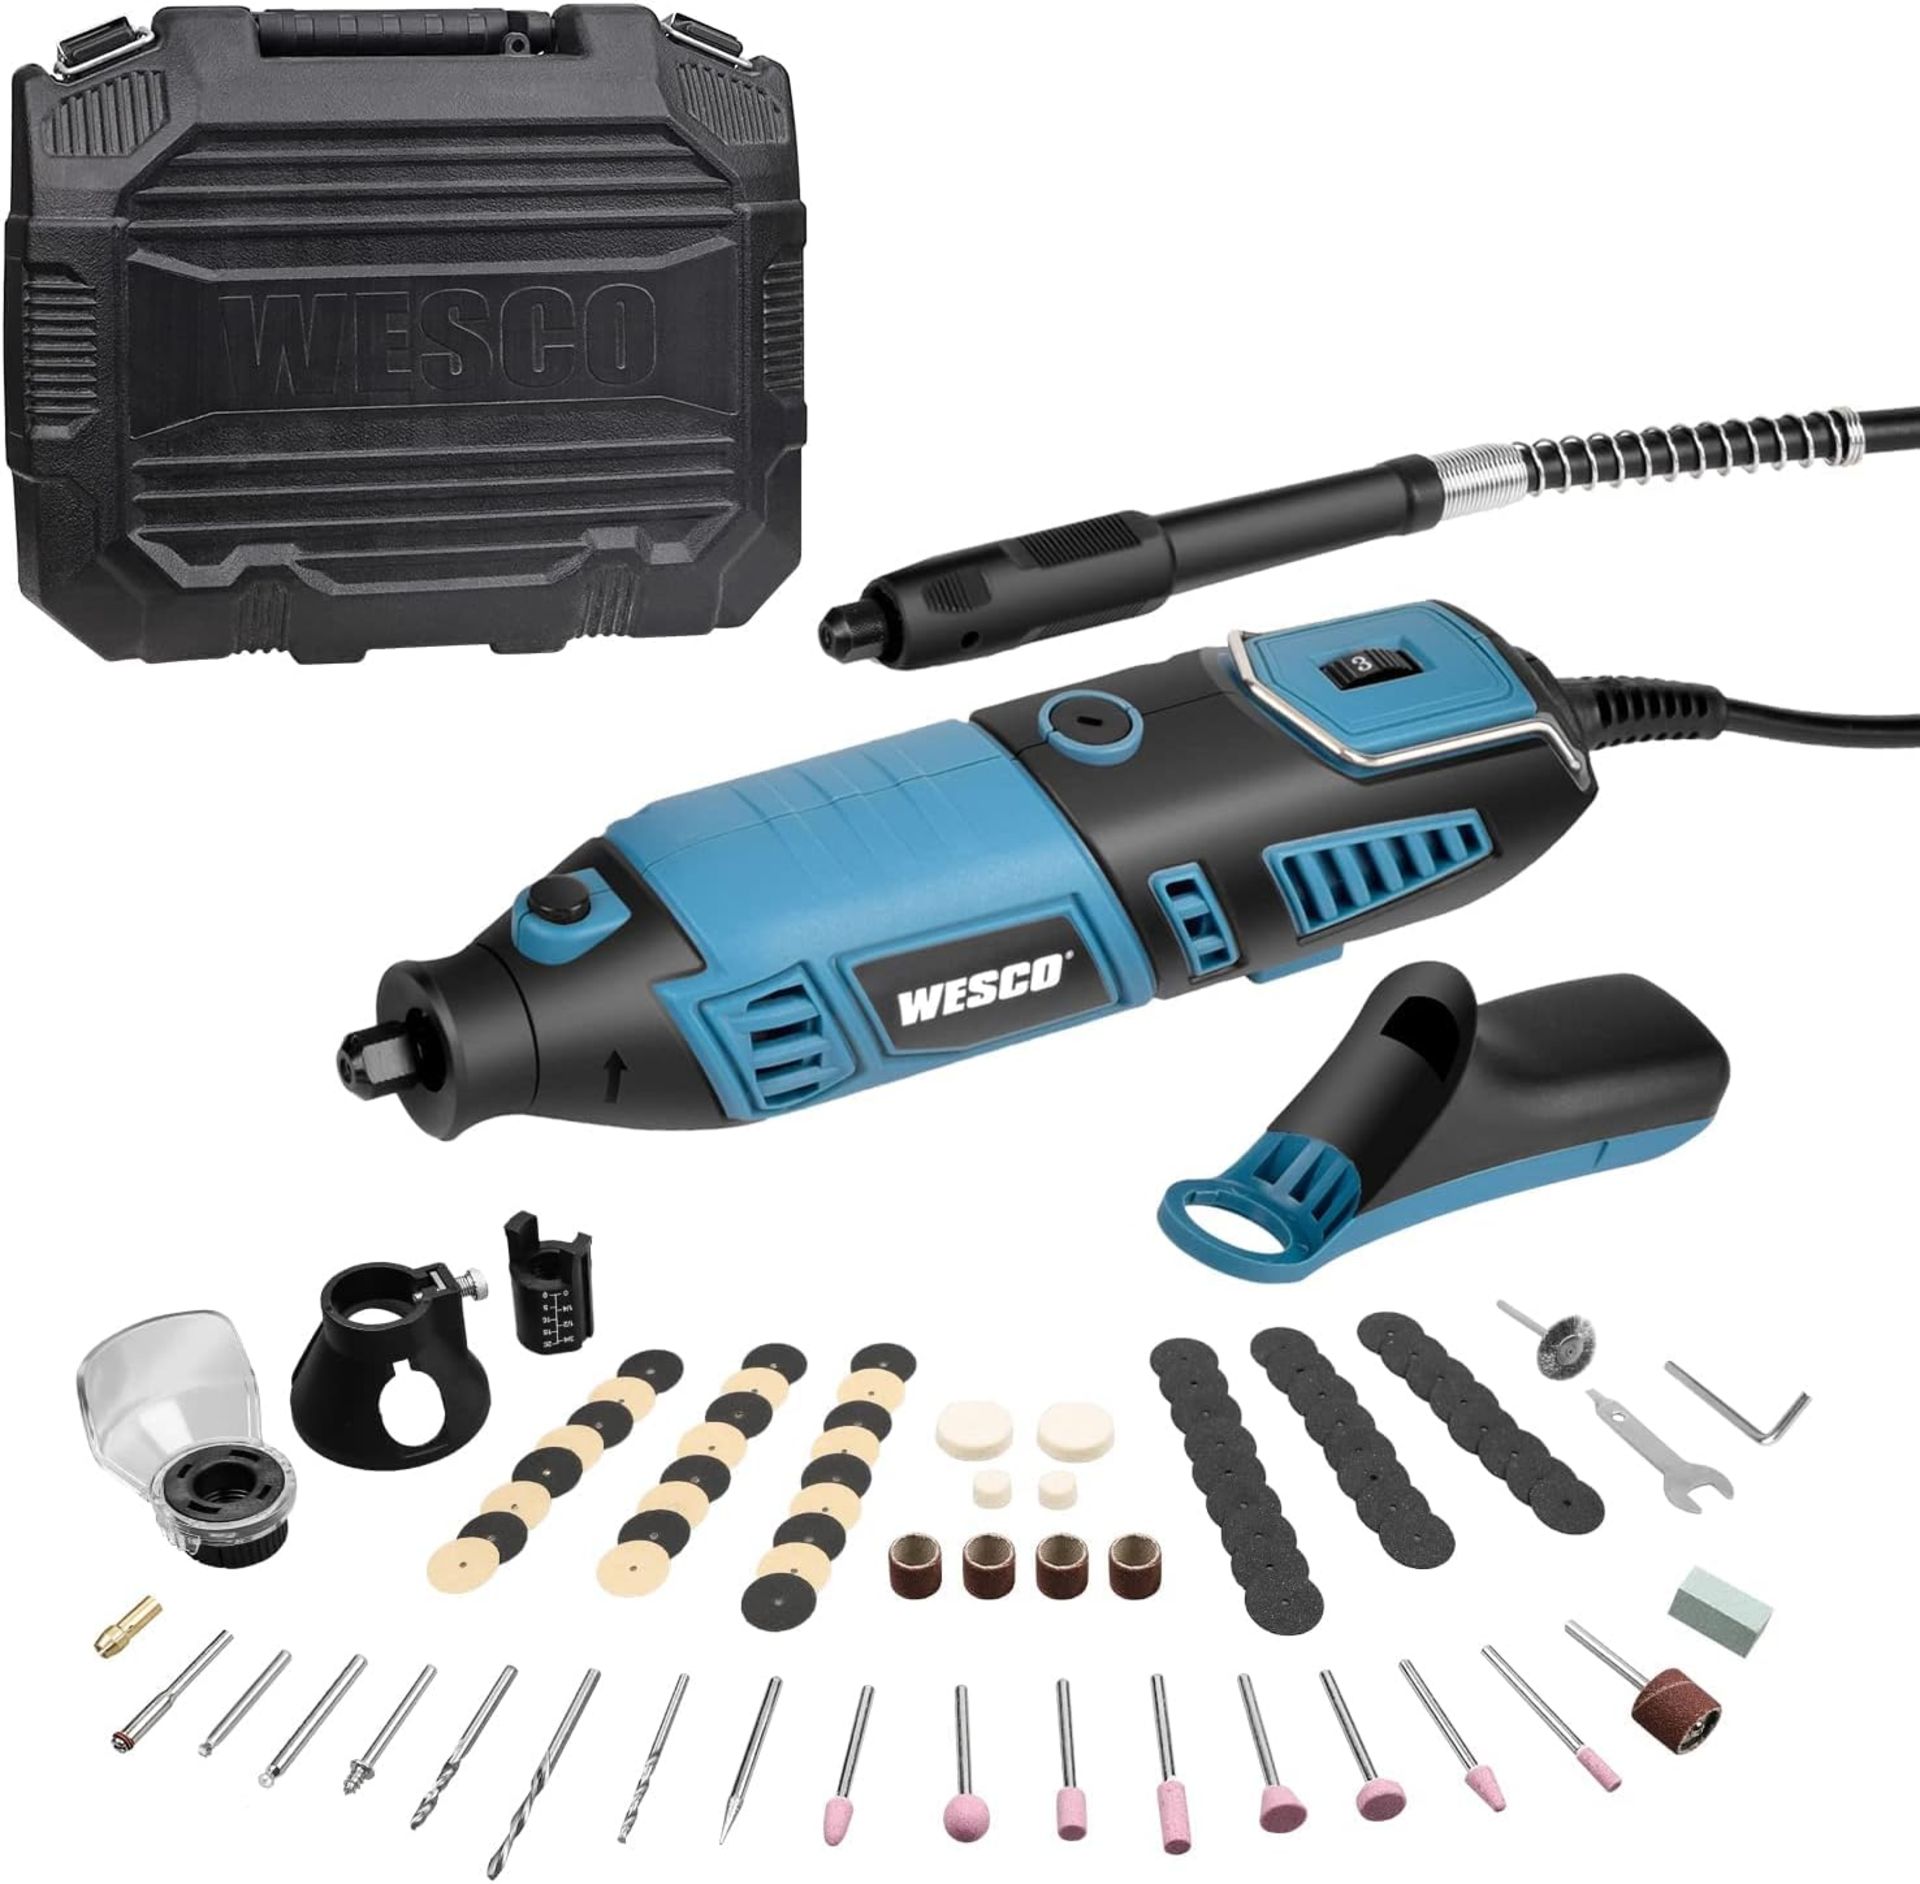 4x NEW & BOXED WESCO 160W Rotary Tool Mini Drill Kit with Flexible Shaft & Accessories. RRP £39.99